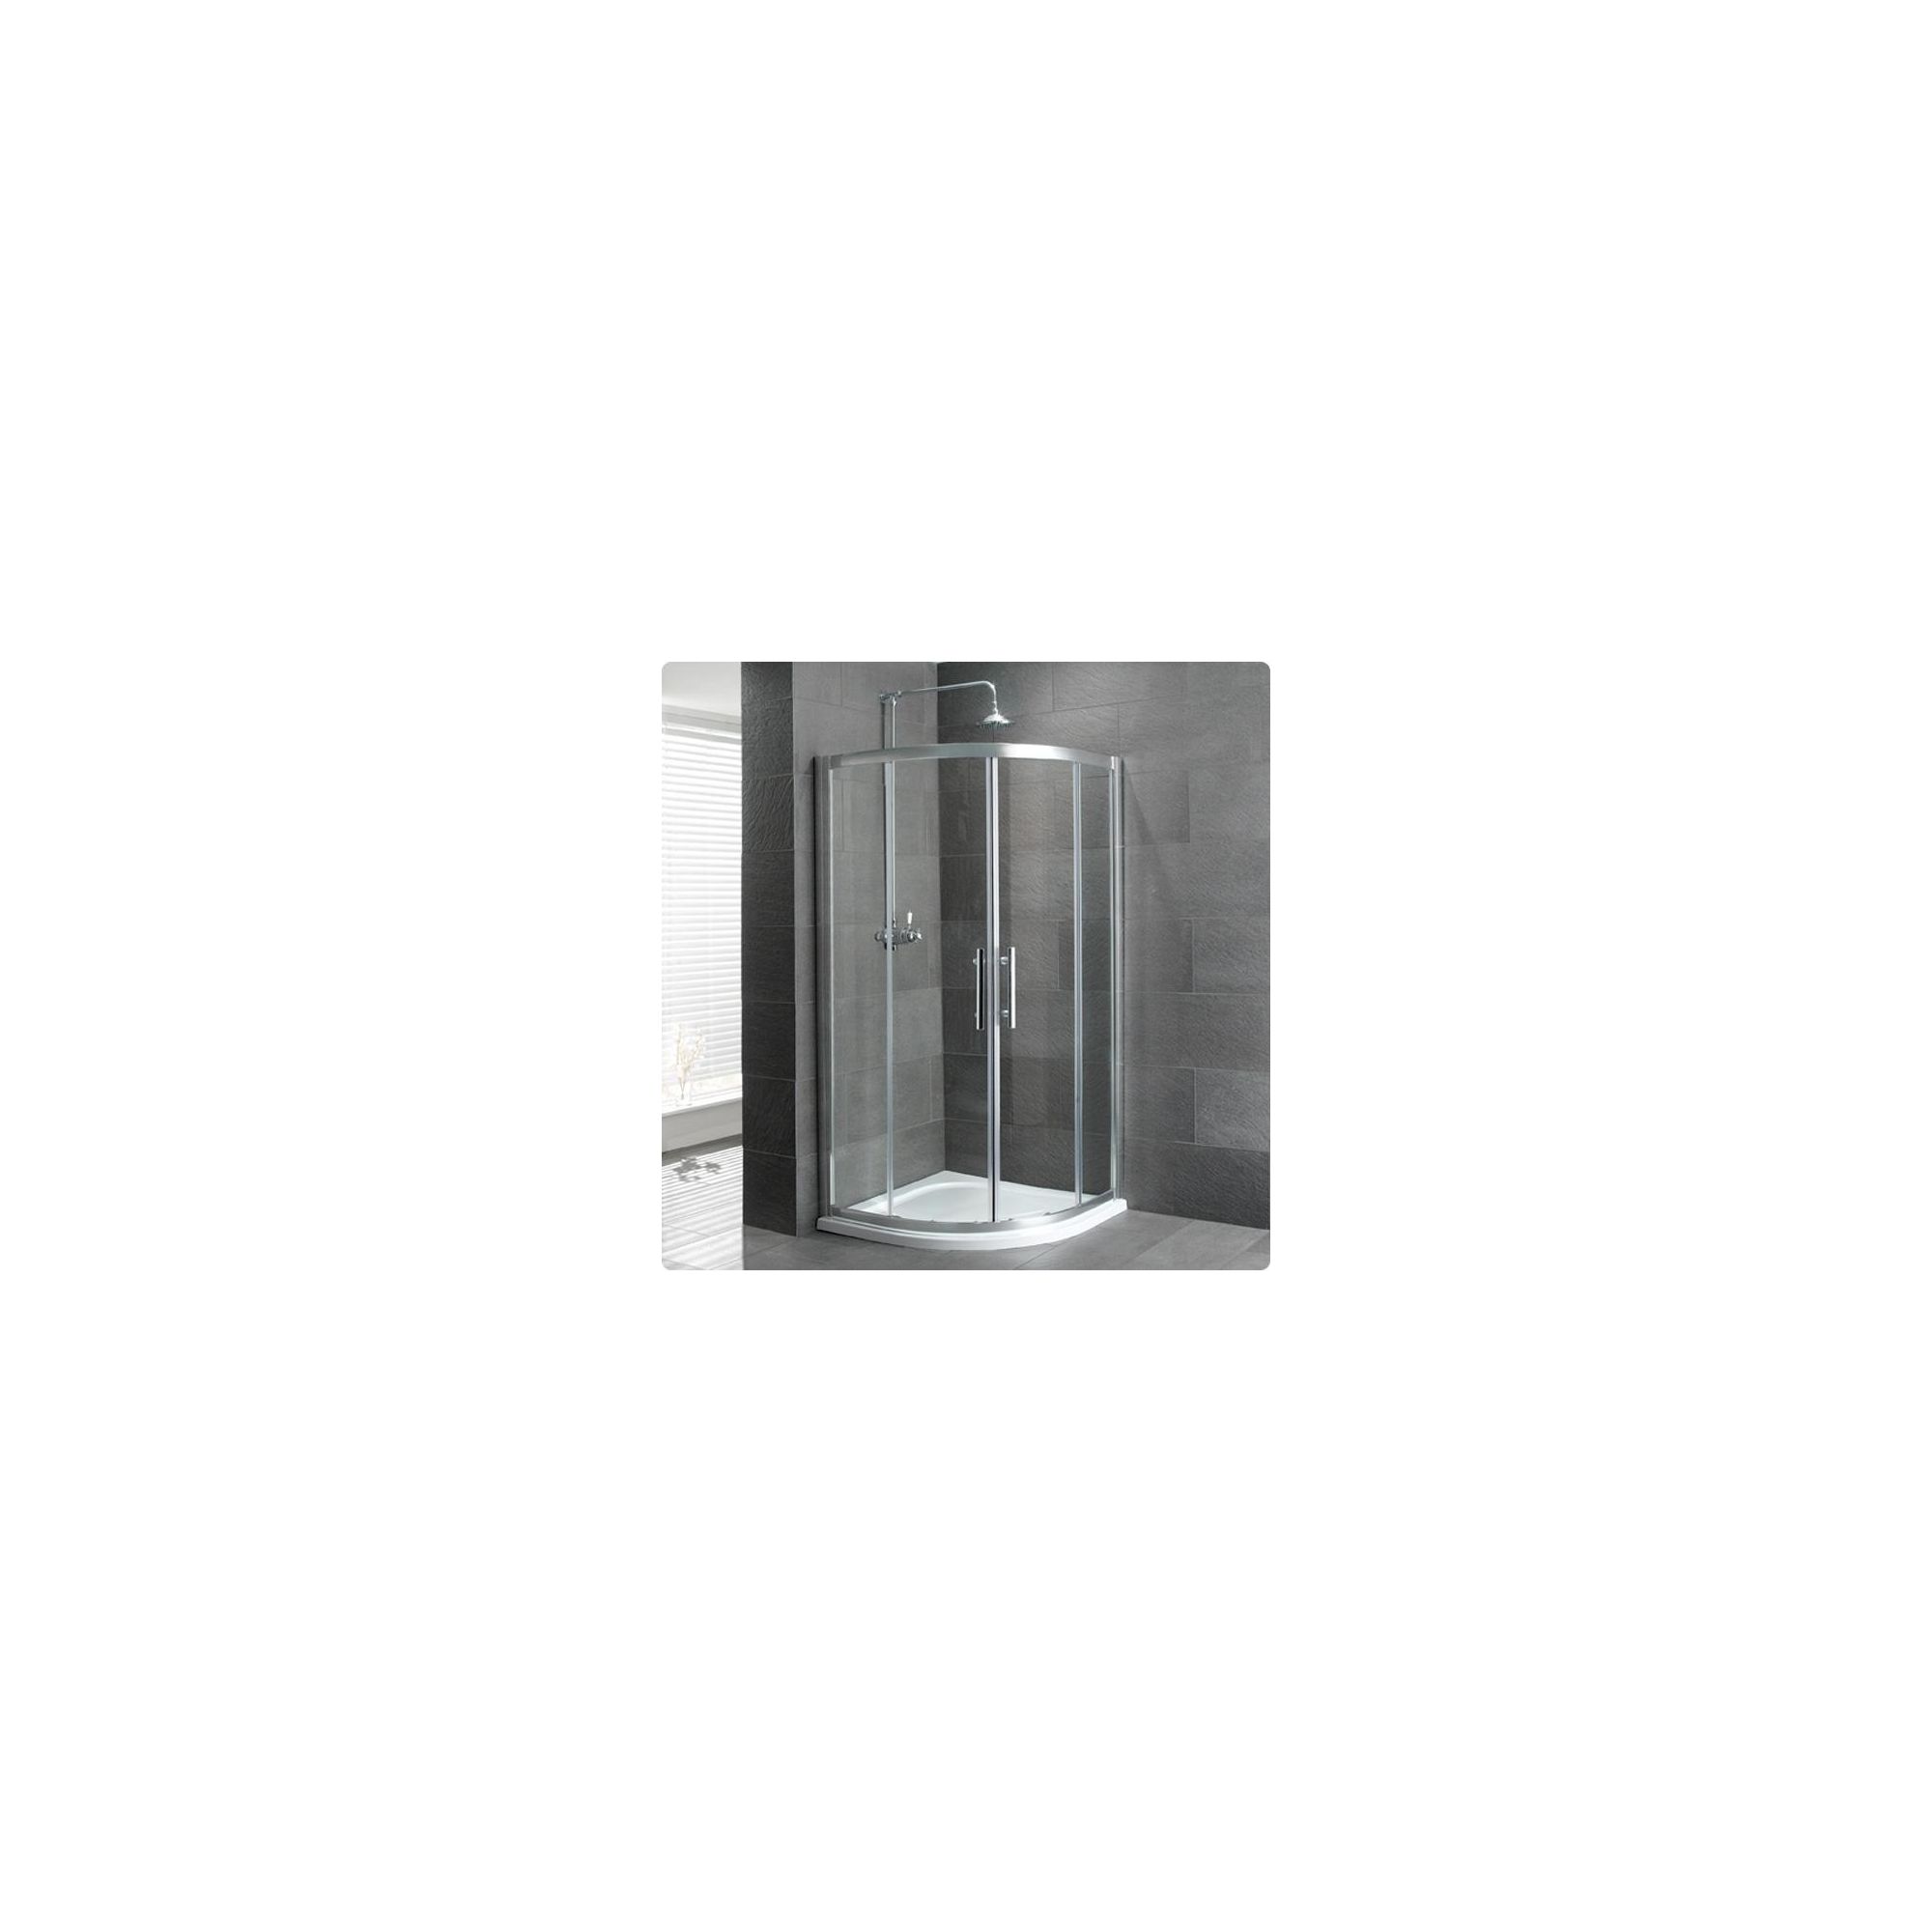 Duchy Select Silver 2 Door Quadrant Shower Enclosure 800mm, Standard Tray, 6mm Glass at Tesco Direct